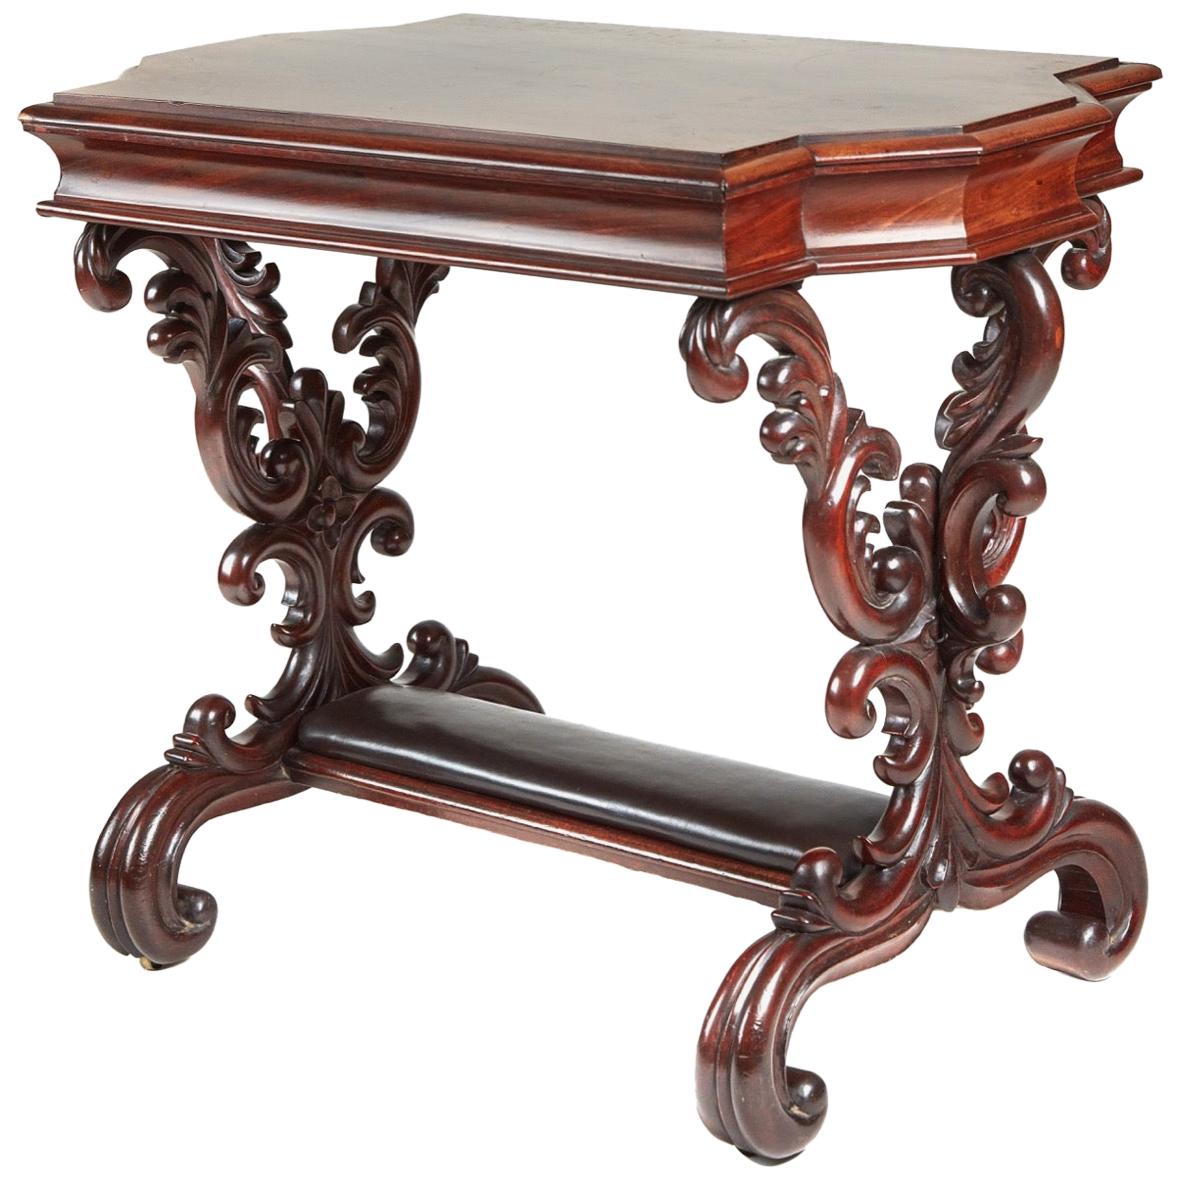 Outstanding Quality Carved Antique Mahogany Centre Table, circa 1850